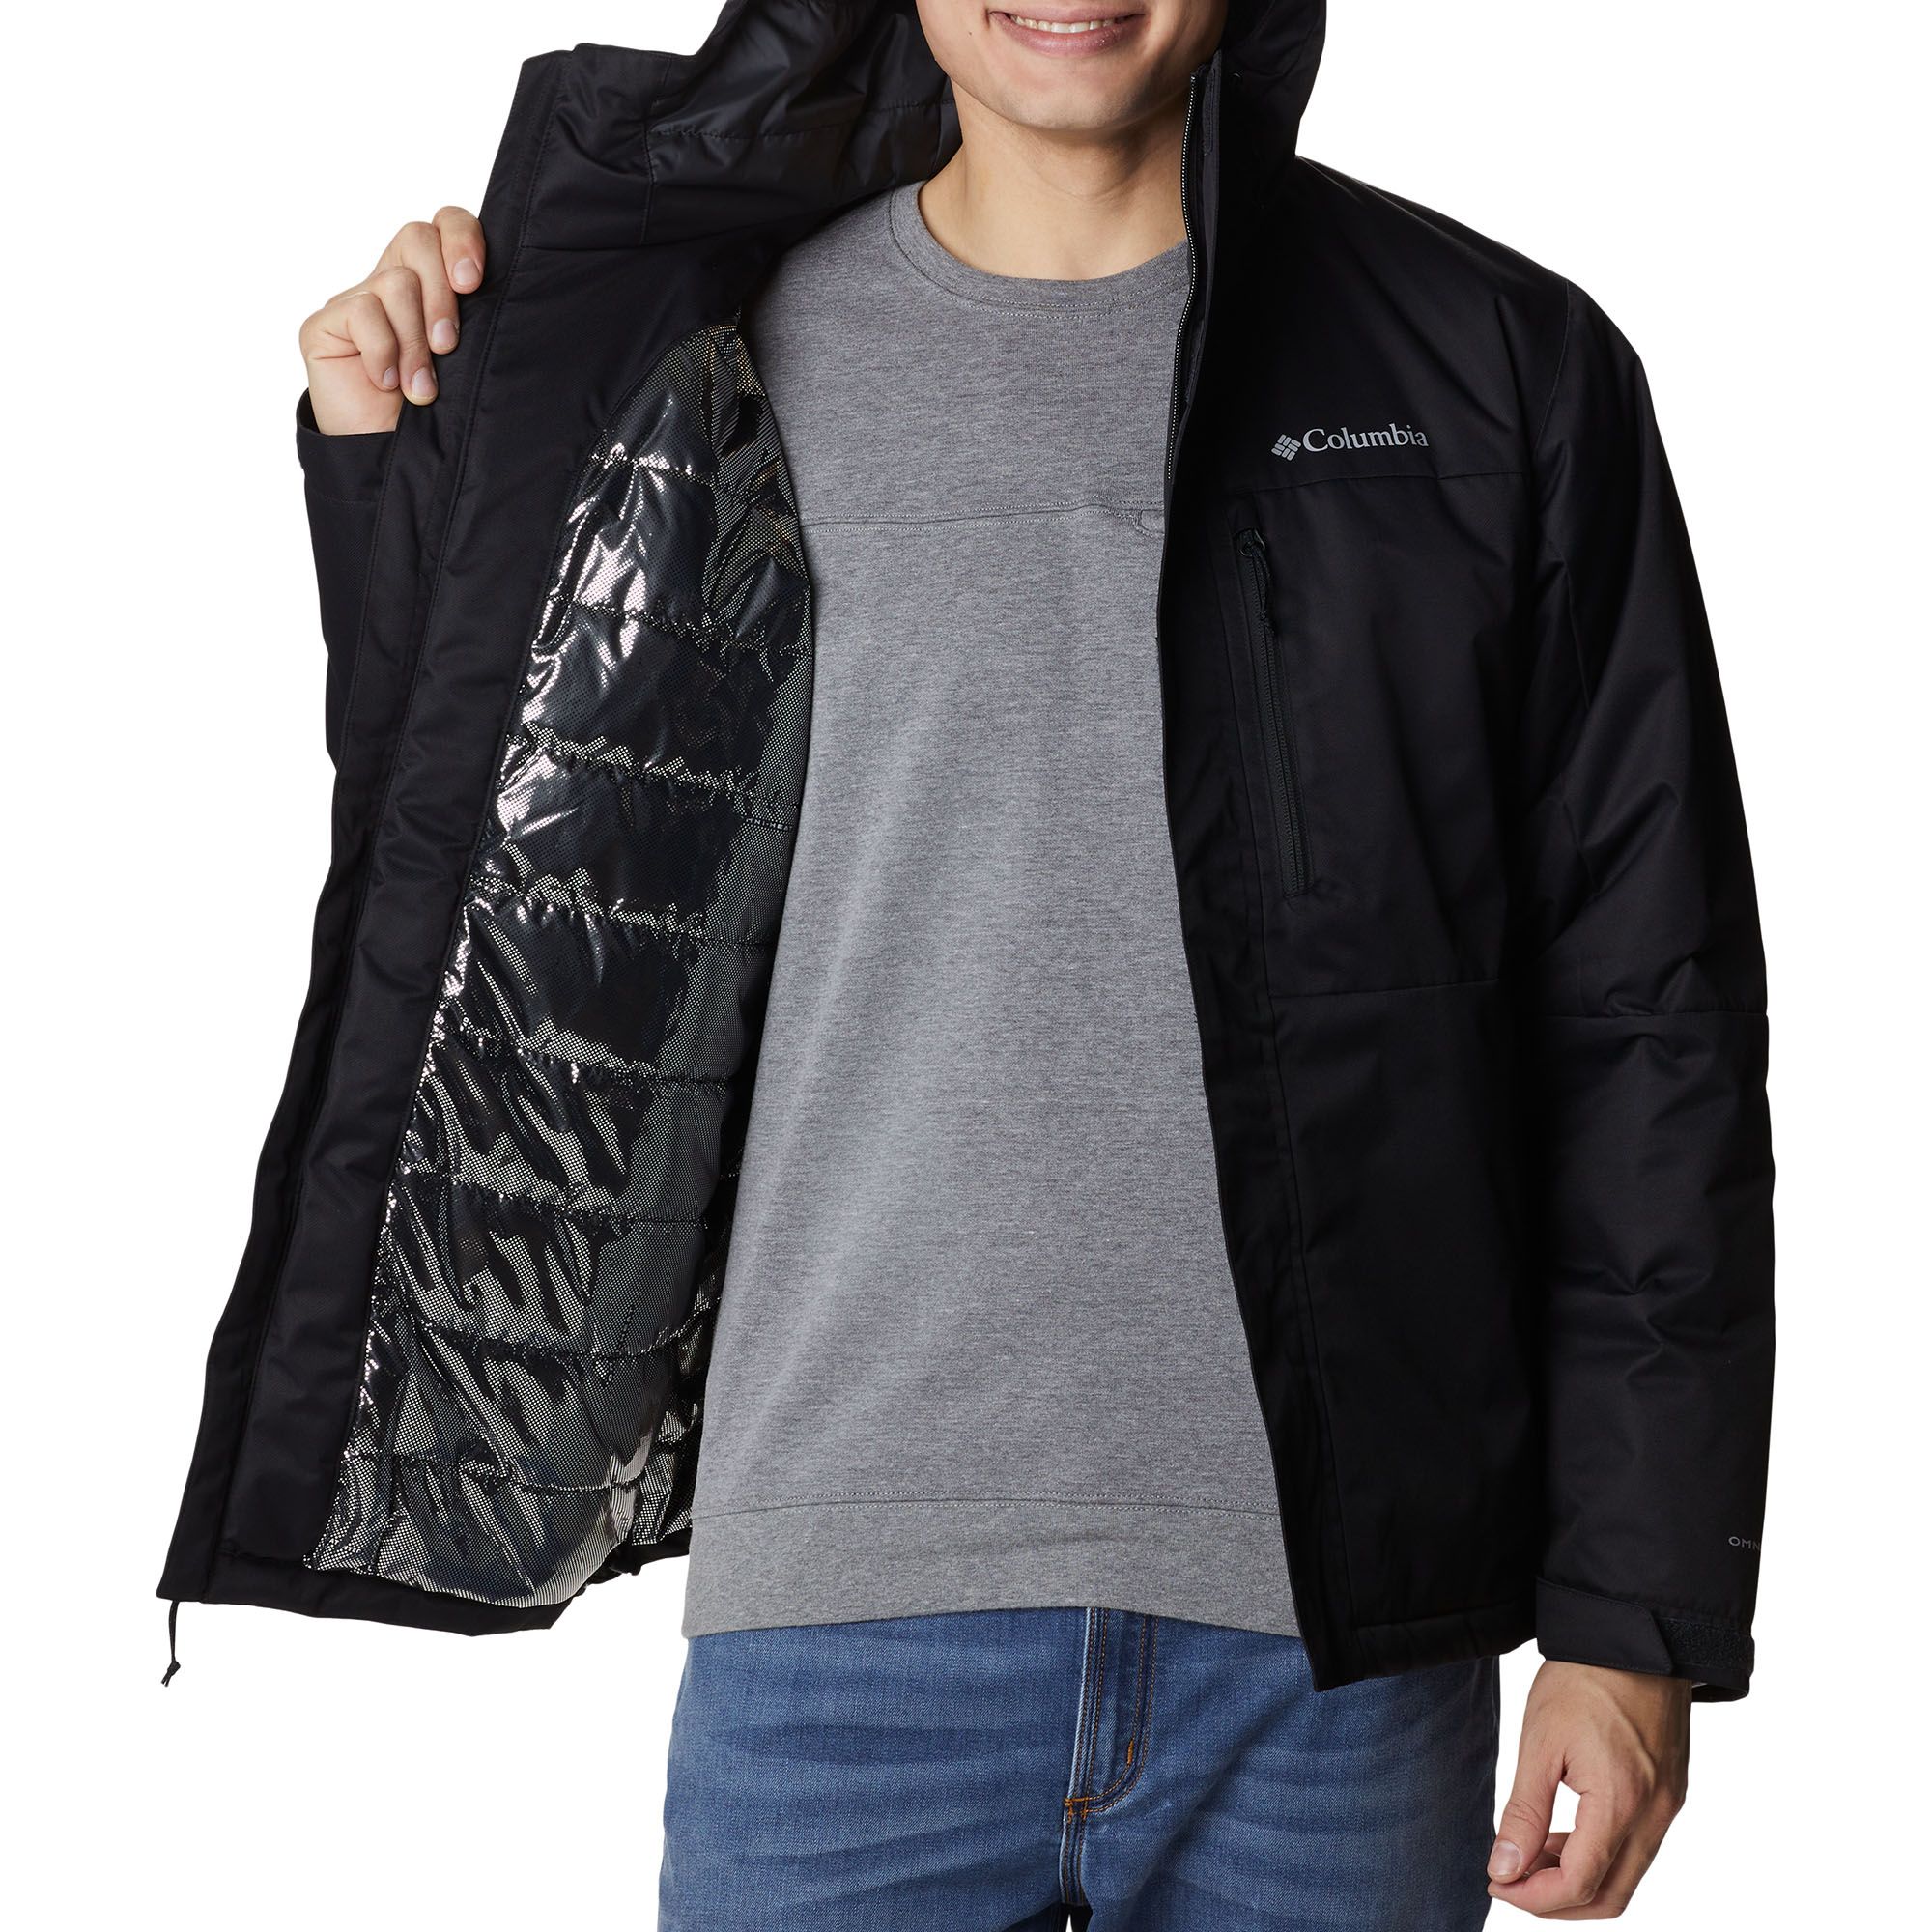 Columbia Hikebound Insulated Jacket